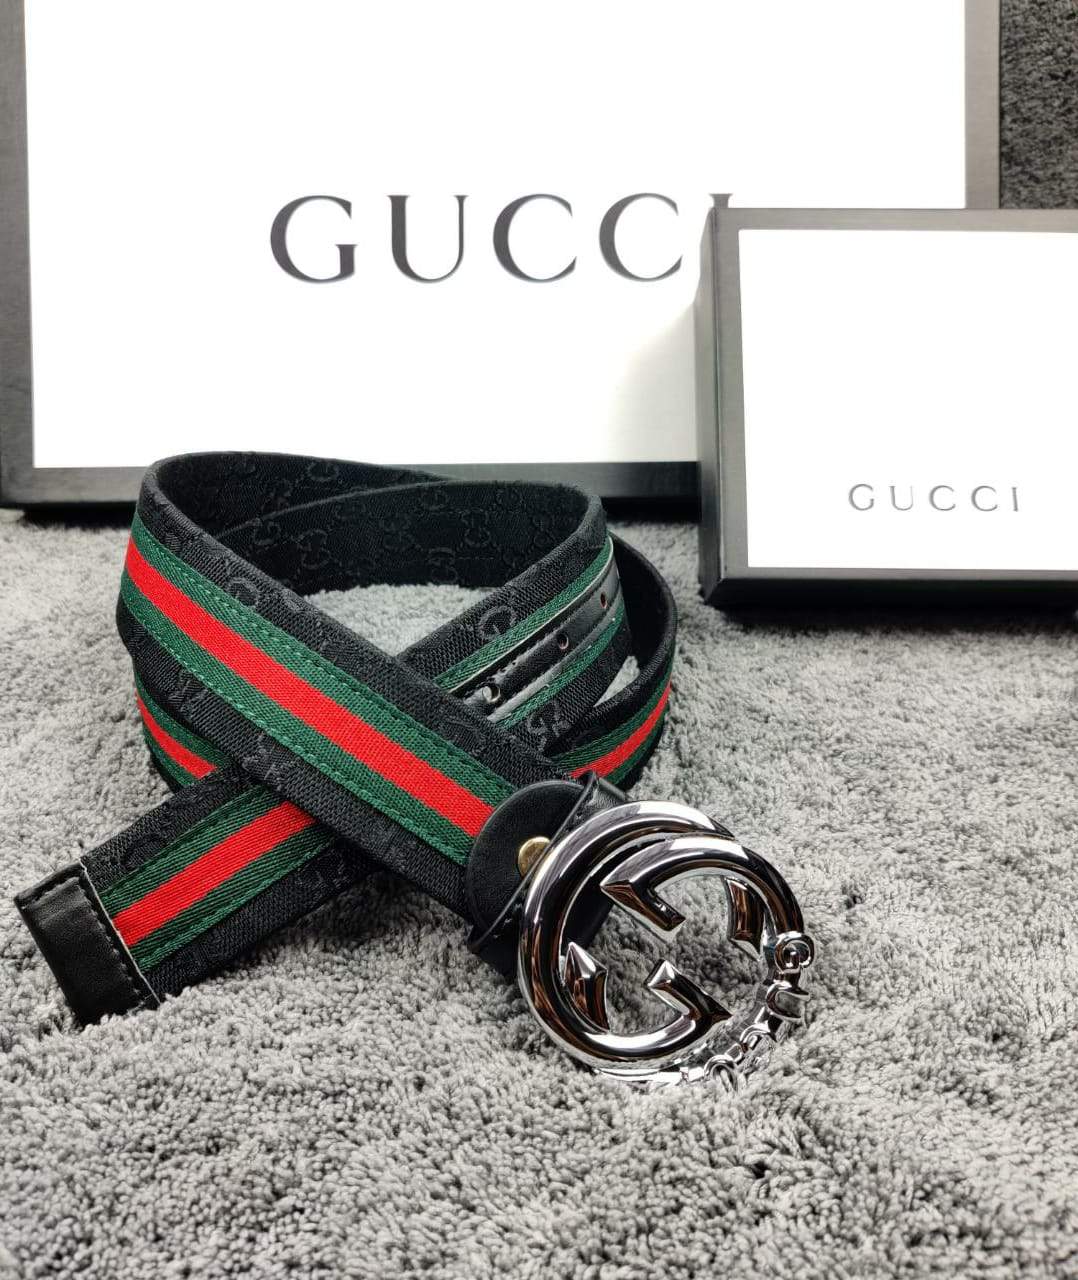 Gucci Black Color Gucci Print Leather Formal Men's Women's Waist Belt For Man Woman Or Girl Formal Gucci Buckle Gift Belt GC-BB-1995